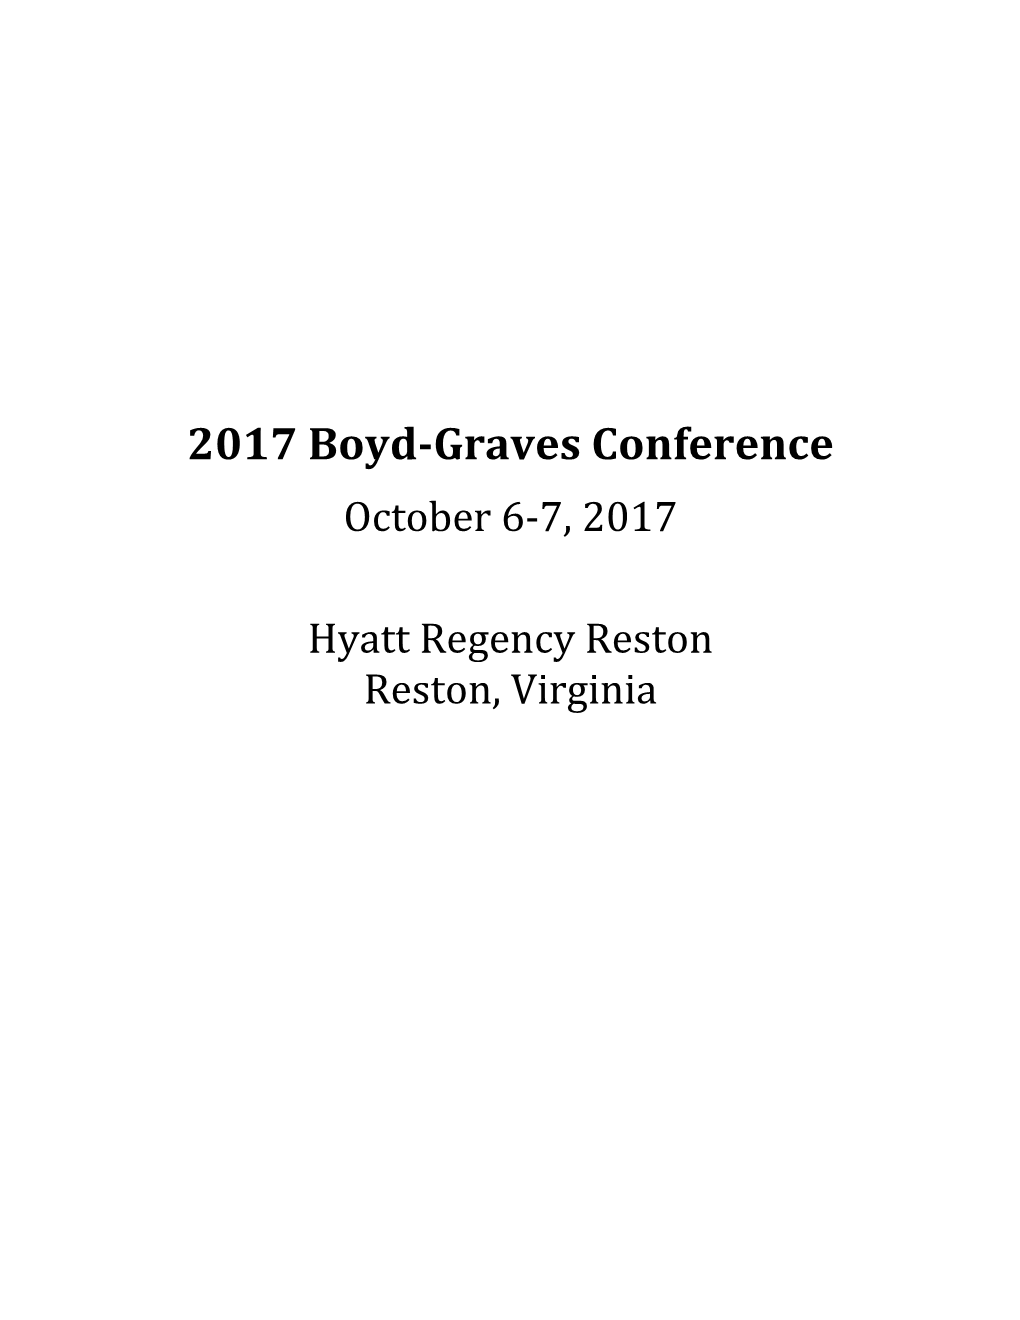 2017 Boyd-Graves Conference October 6-7, 2017